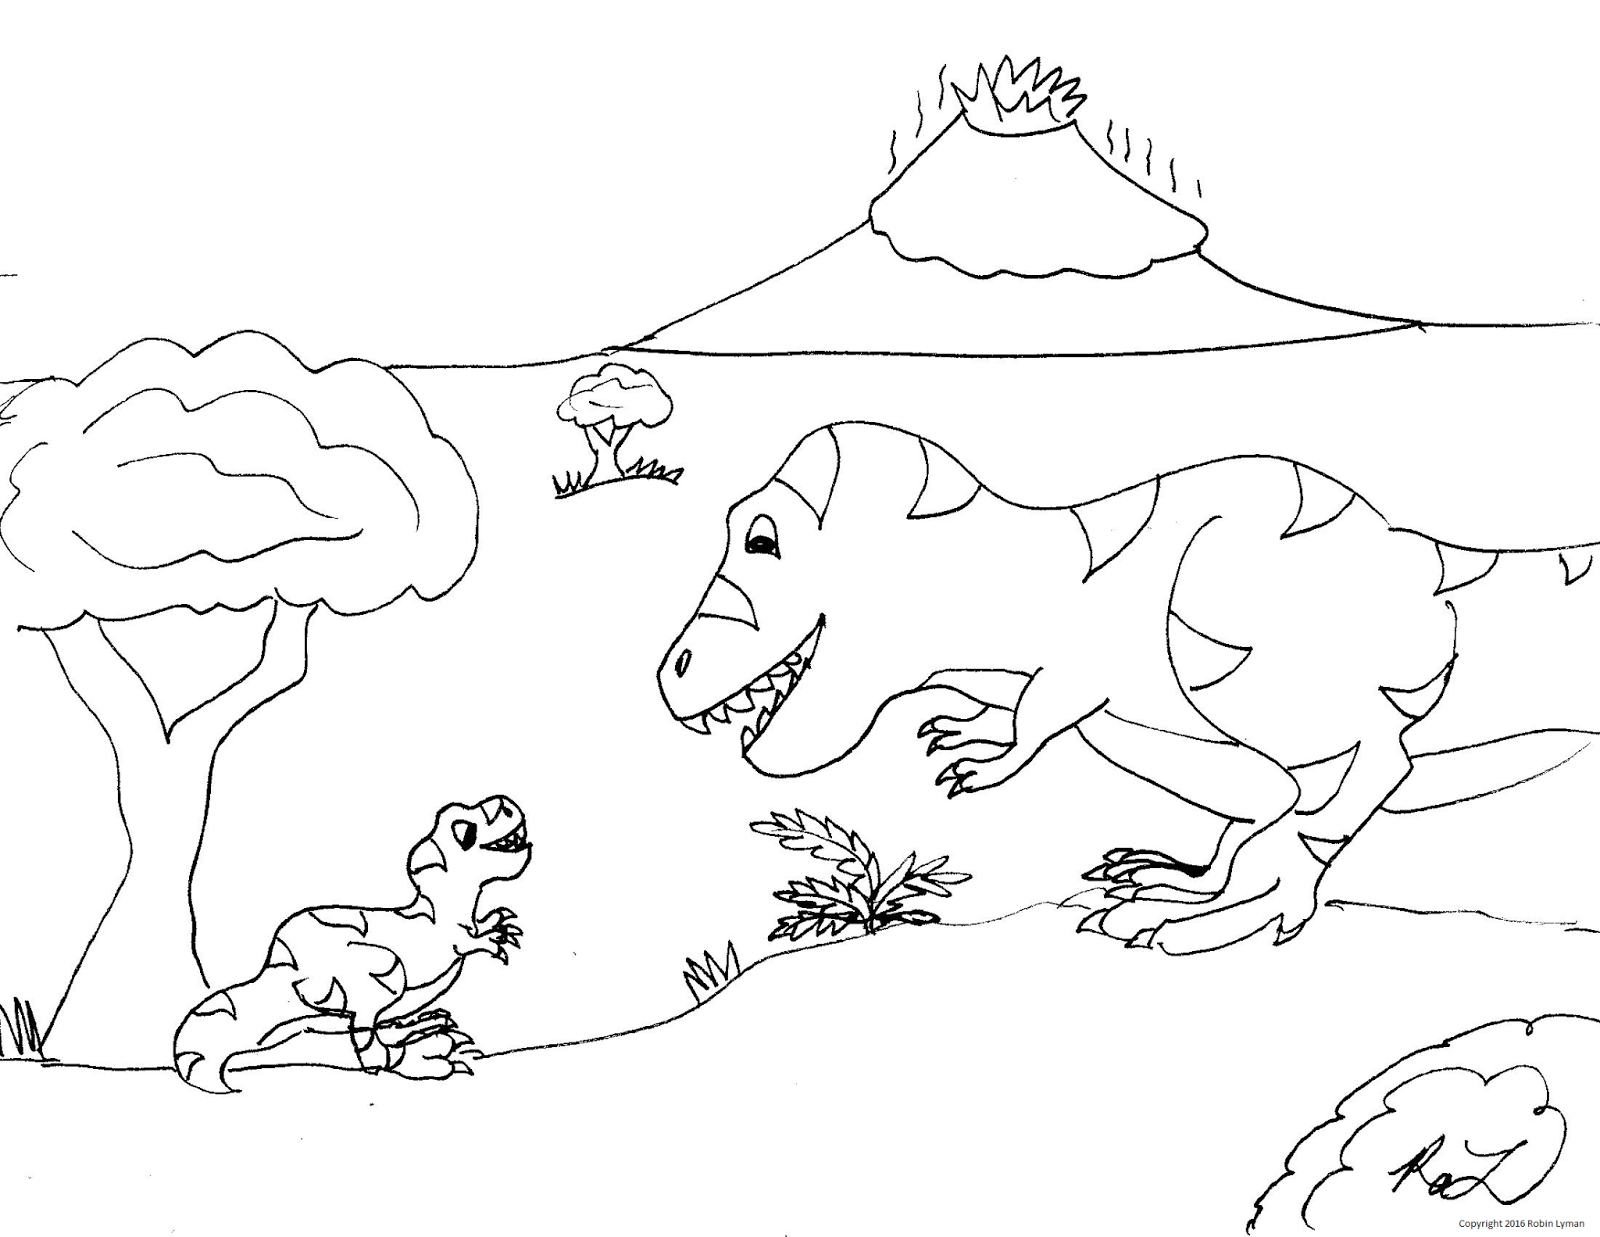 Robin's Great Coloring Pages: T. rex Mommy